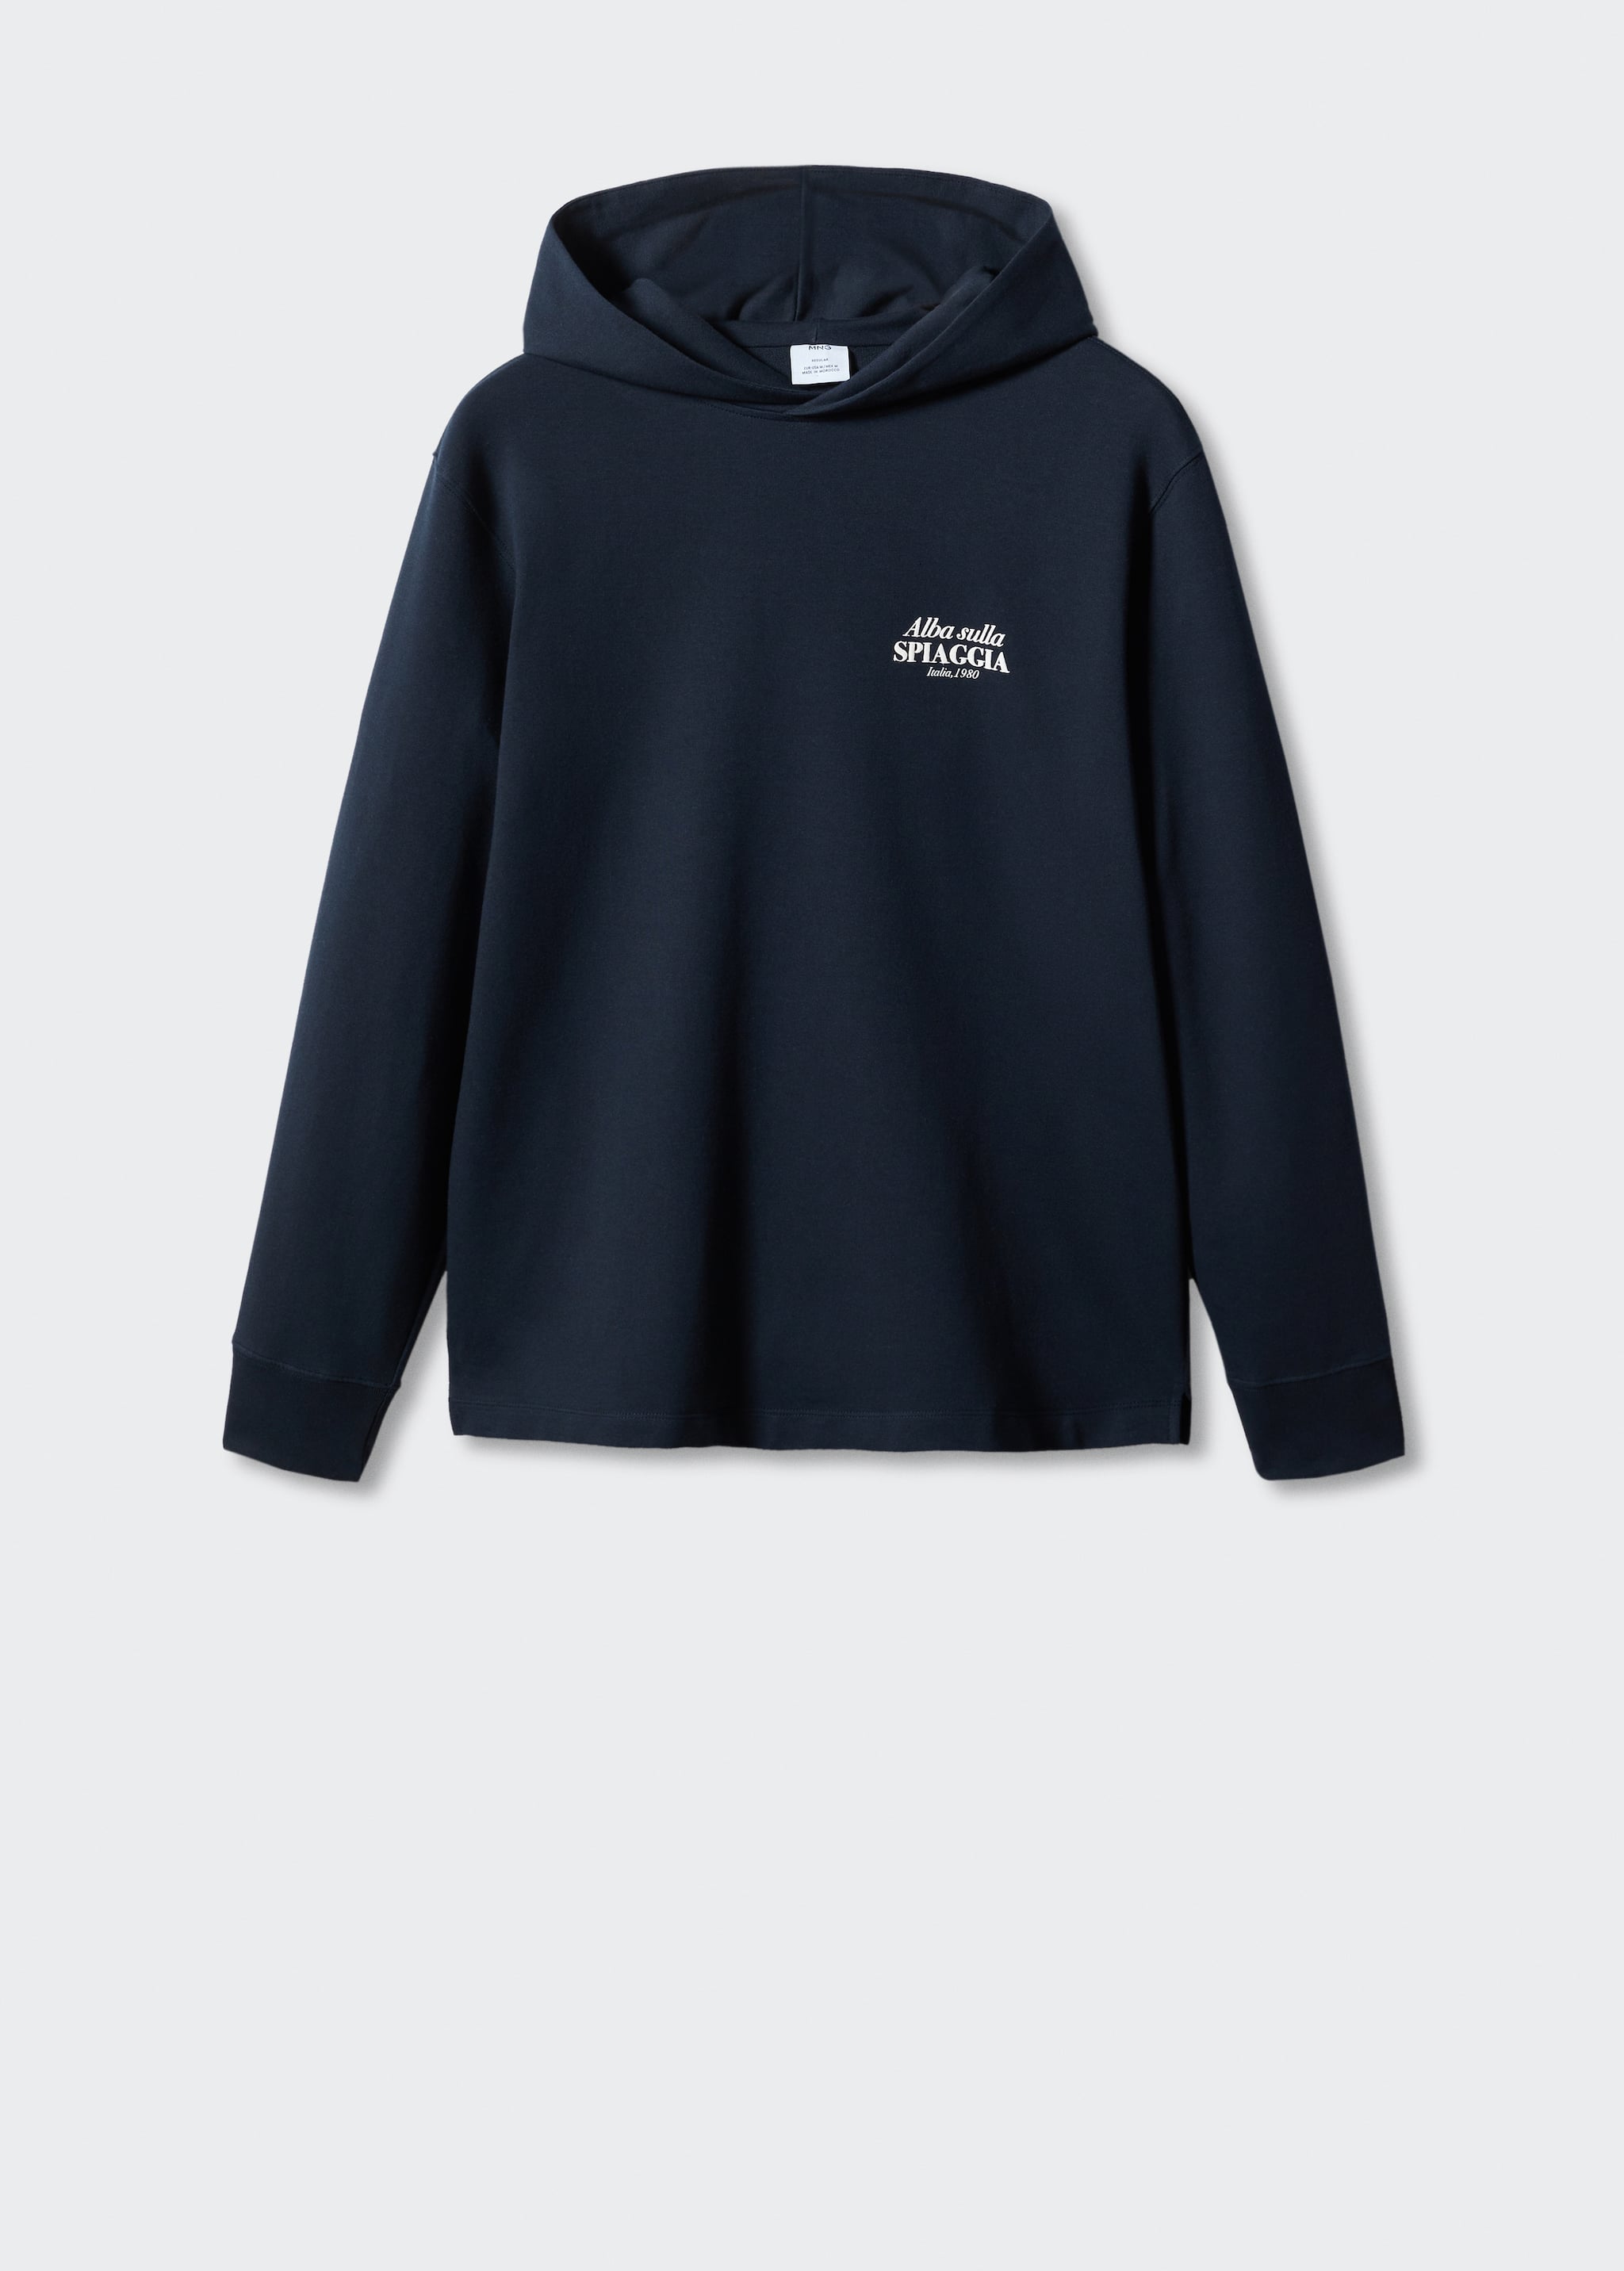 Hooded sweatshirt with text - Article without model